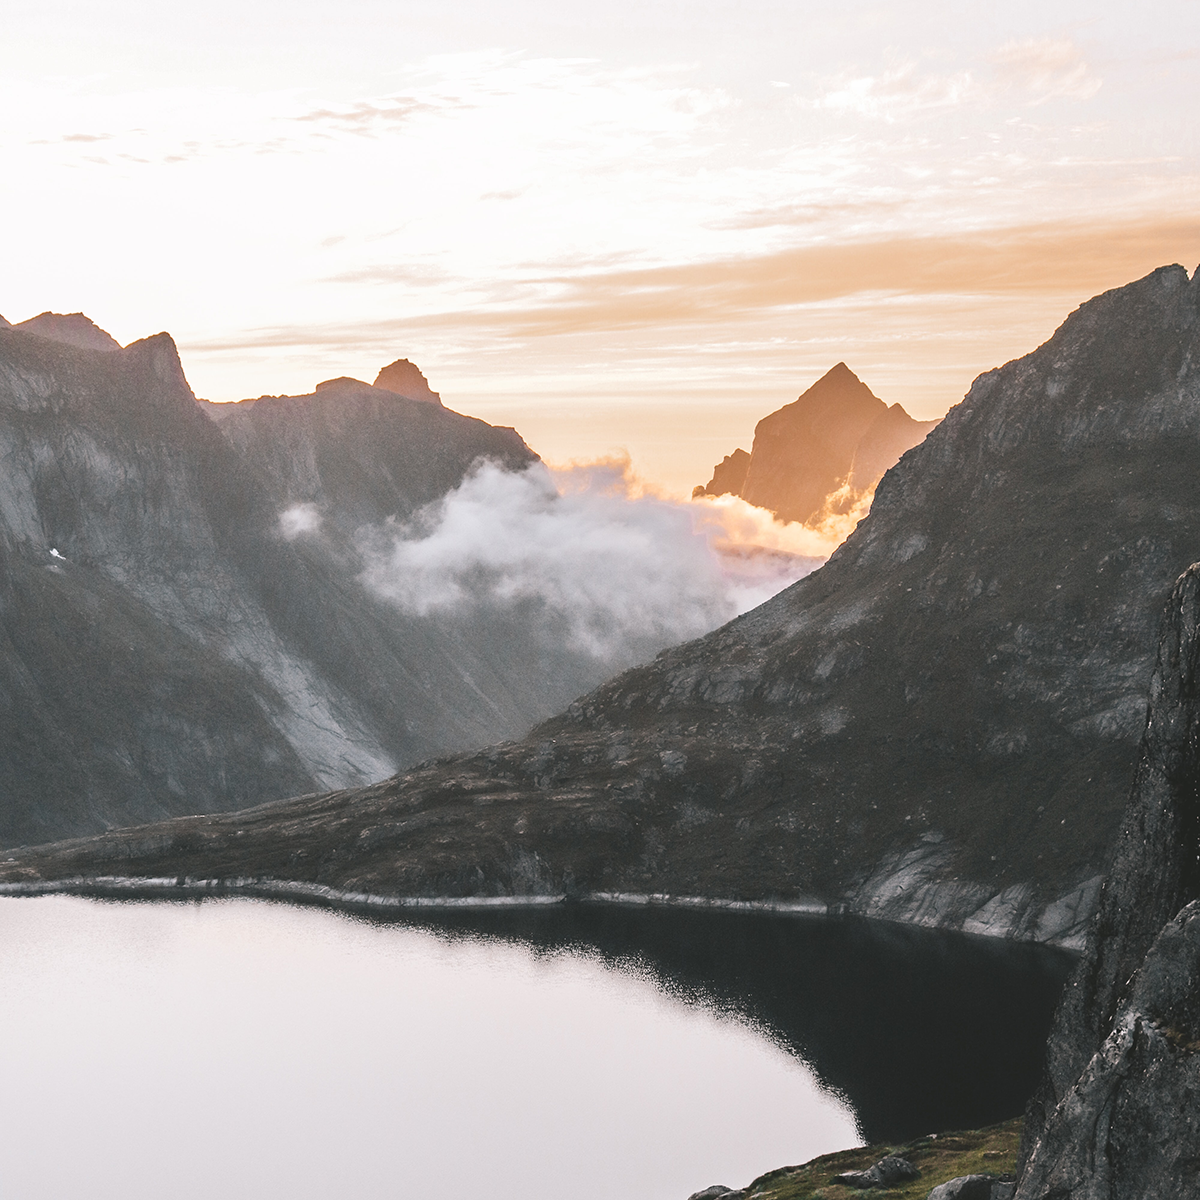 Picture on Mountains. Photo Credits: Guillaume Briard for Unsplash.